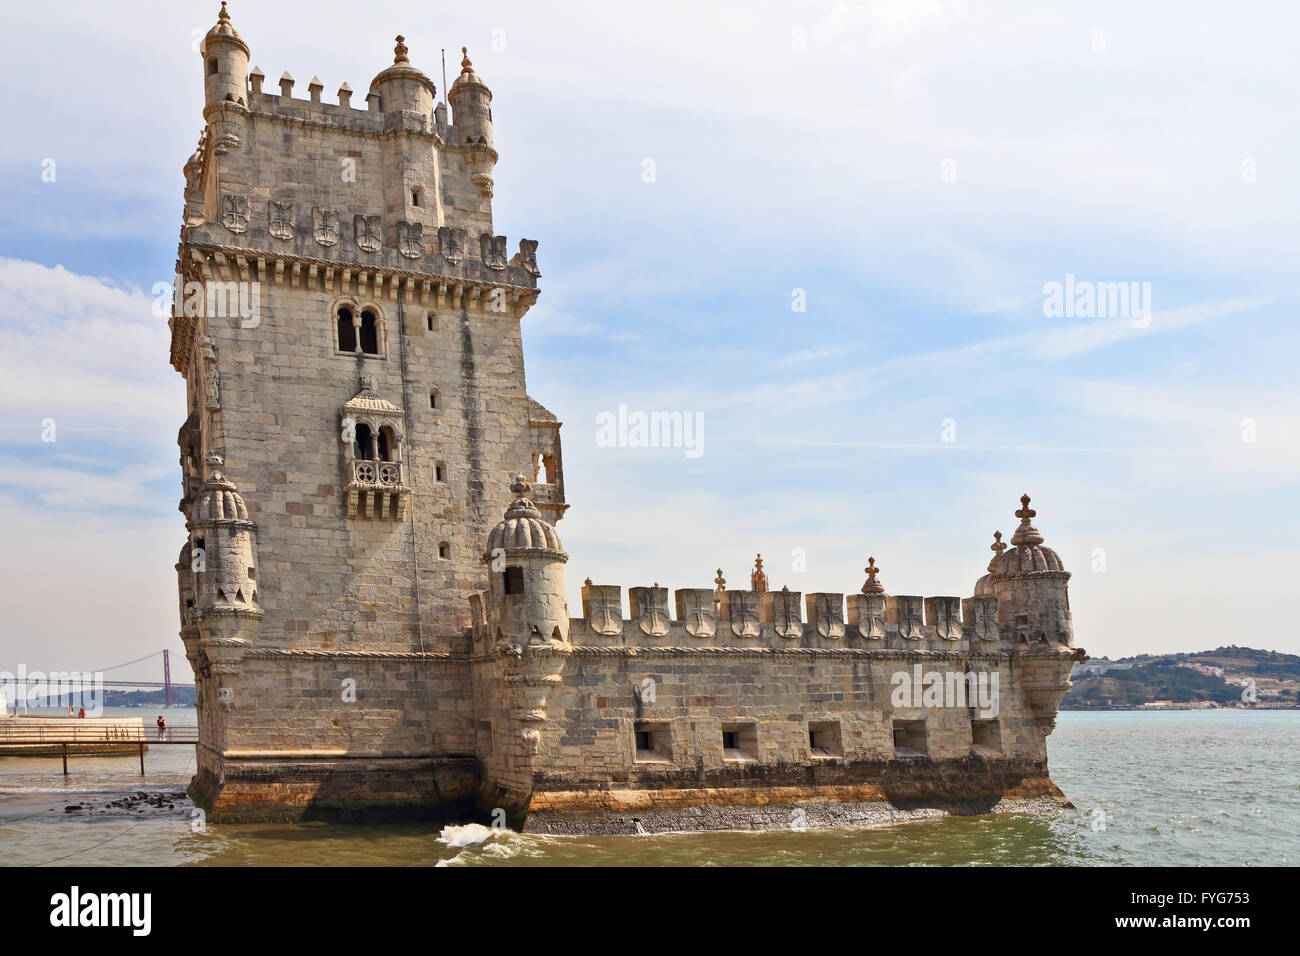 The well-known fortress of Belen in a river Tagus Stock Photo